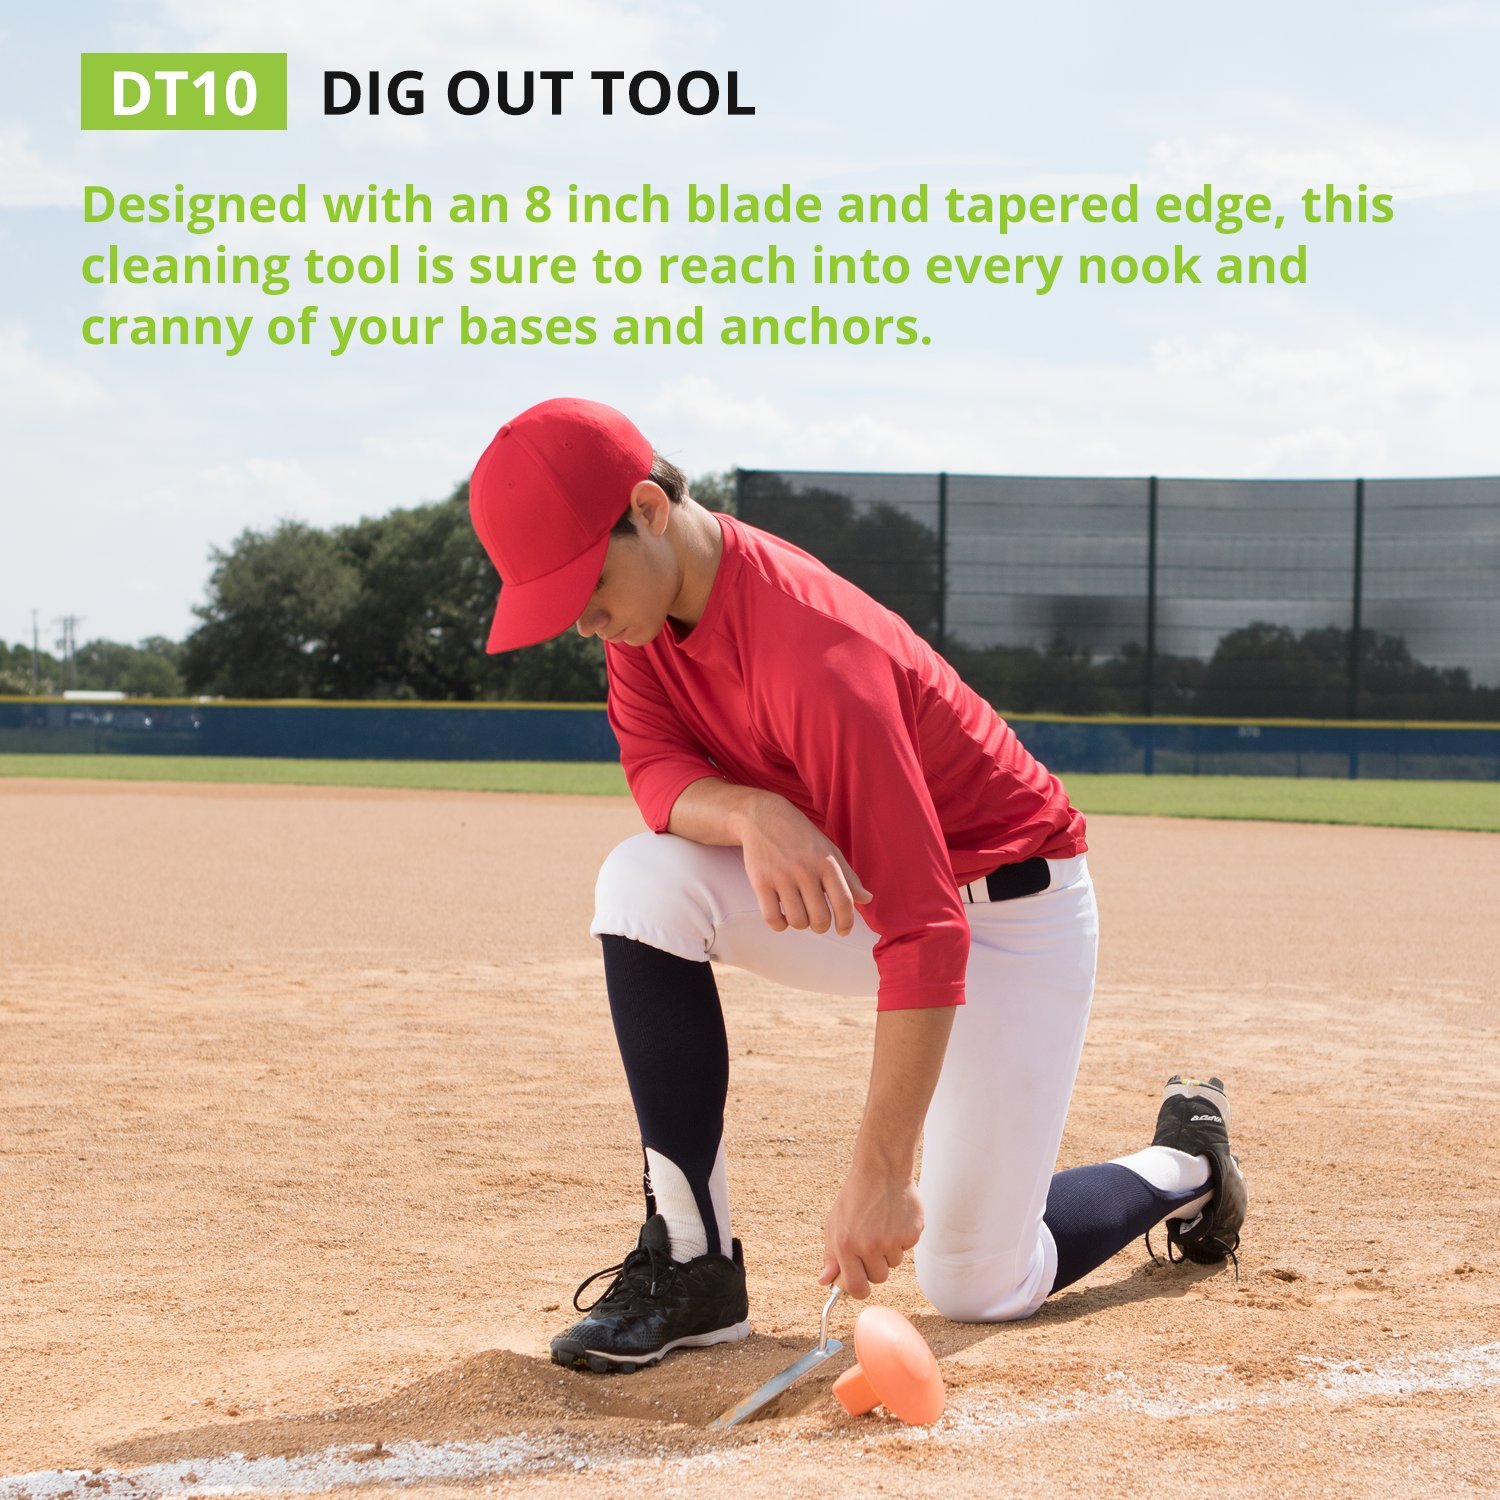 Champion Sports Baseball Dig Out Tool